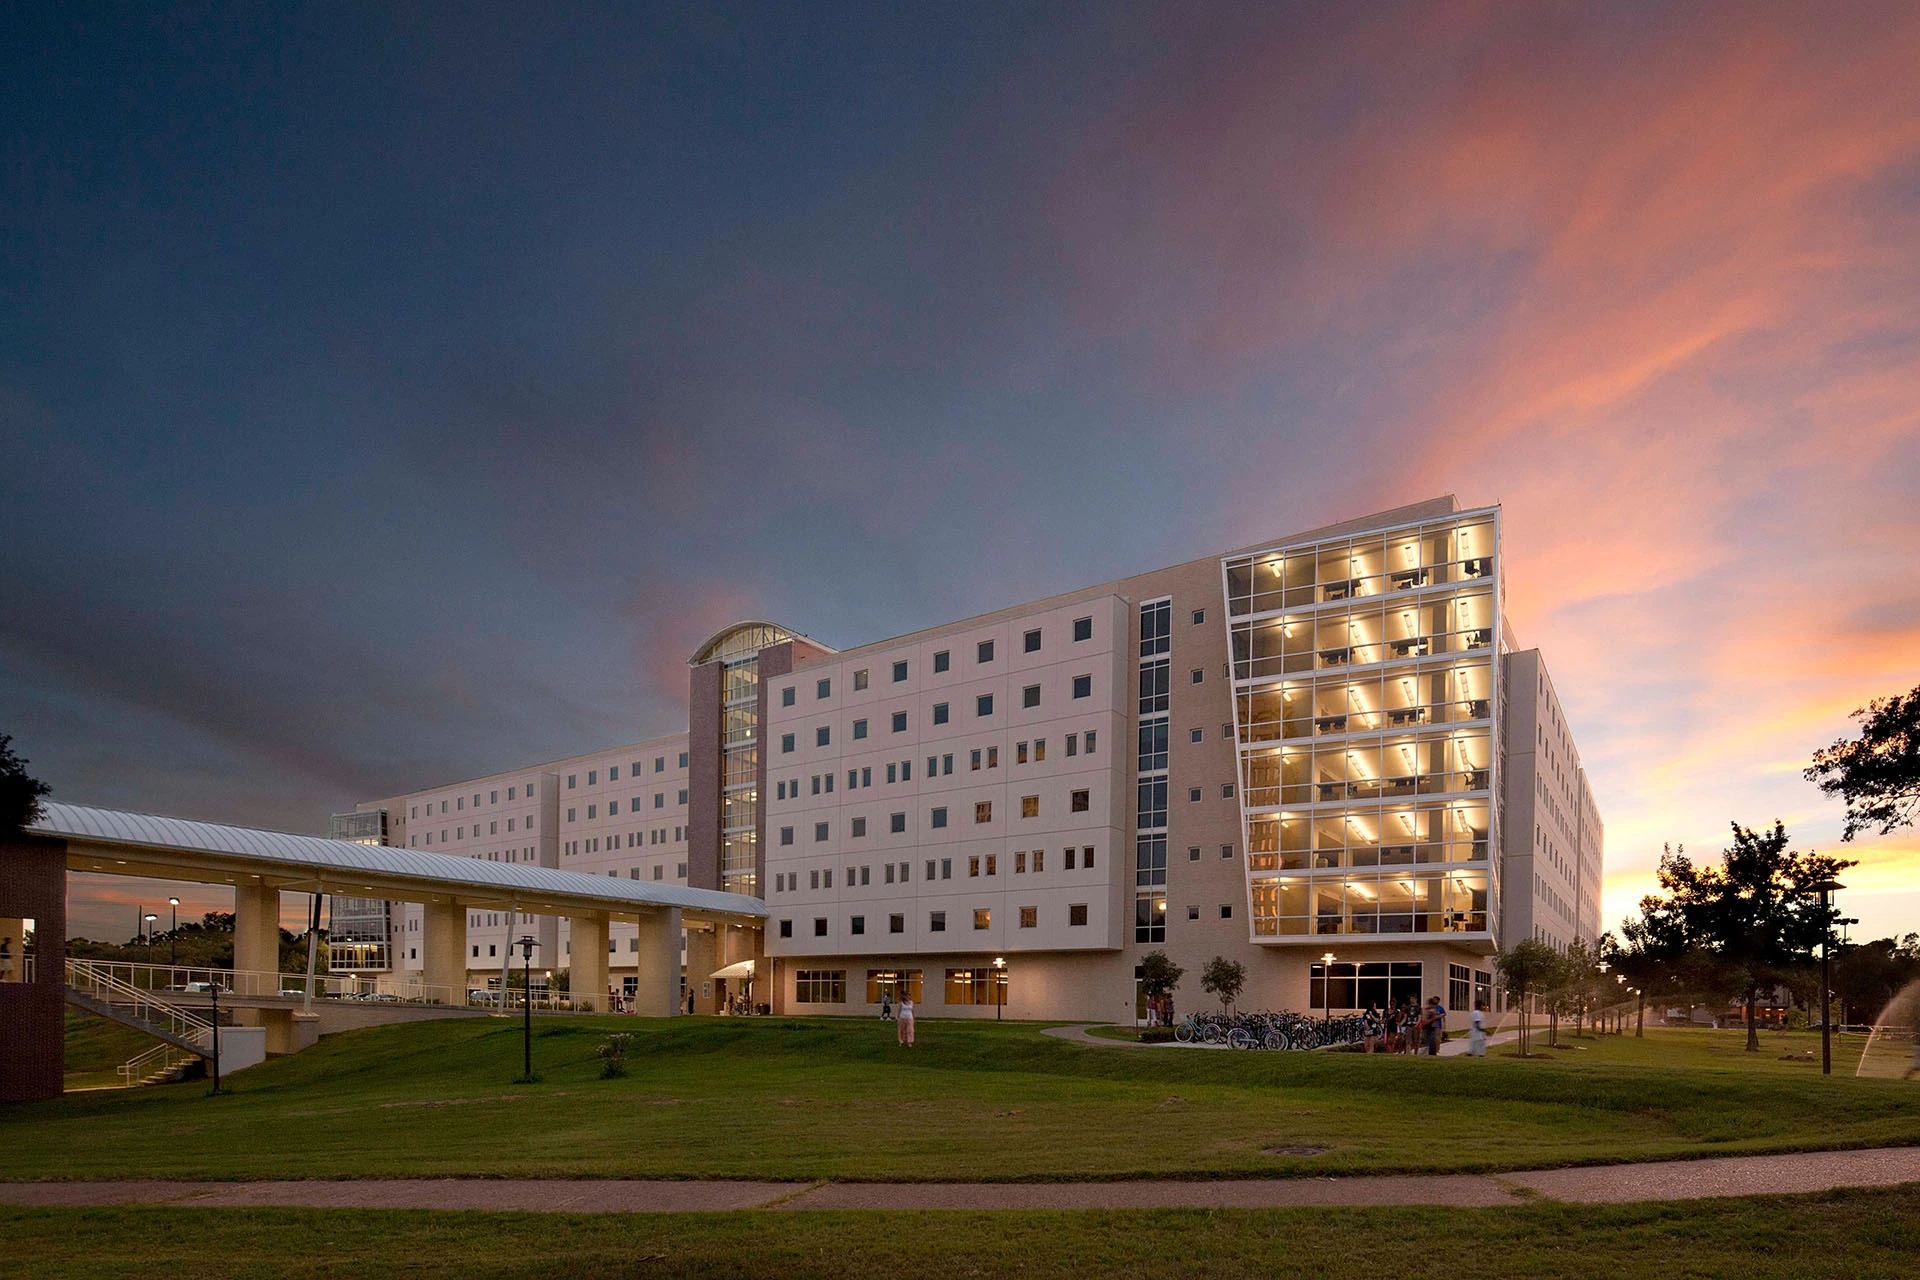 One of many of the University of Houston's student housing buildings.